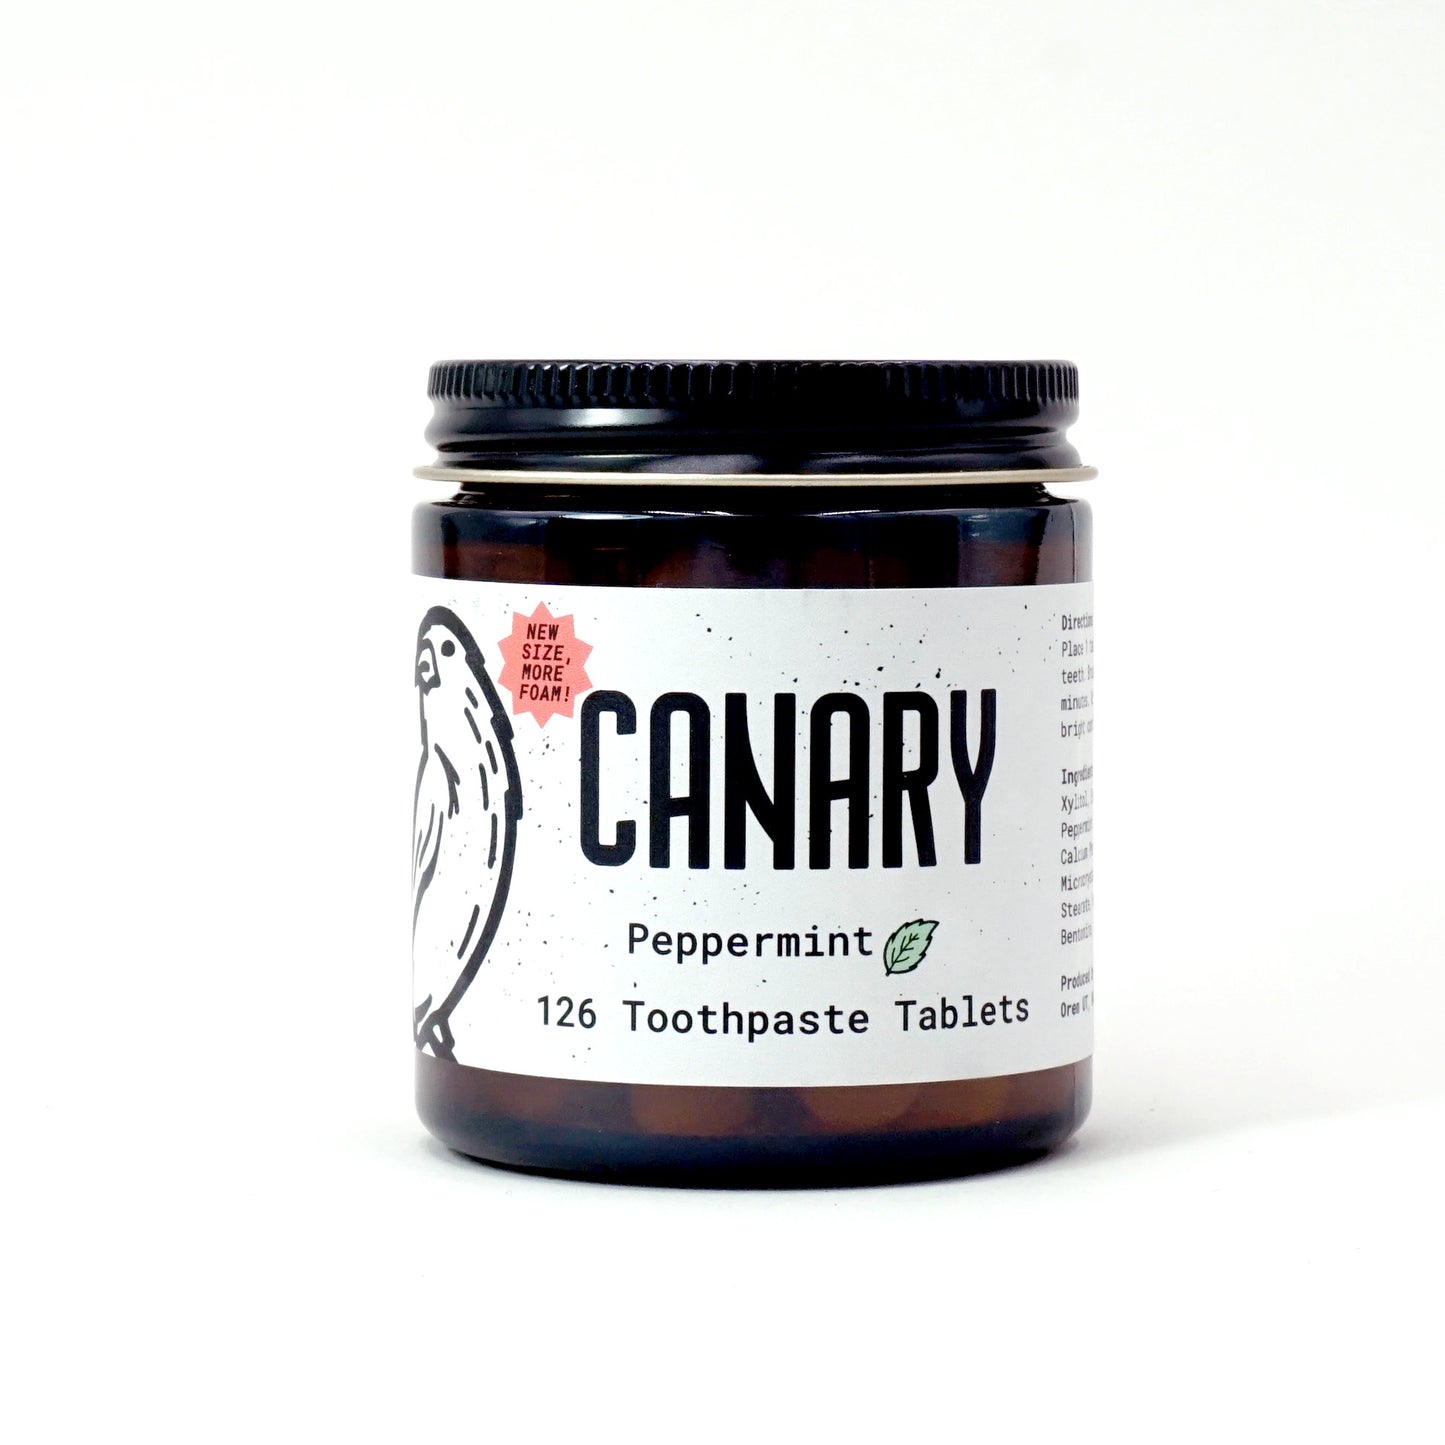 New and improved Canary Peppermint Toothpaste Tablets, 126 count jar, view of front of jar